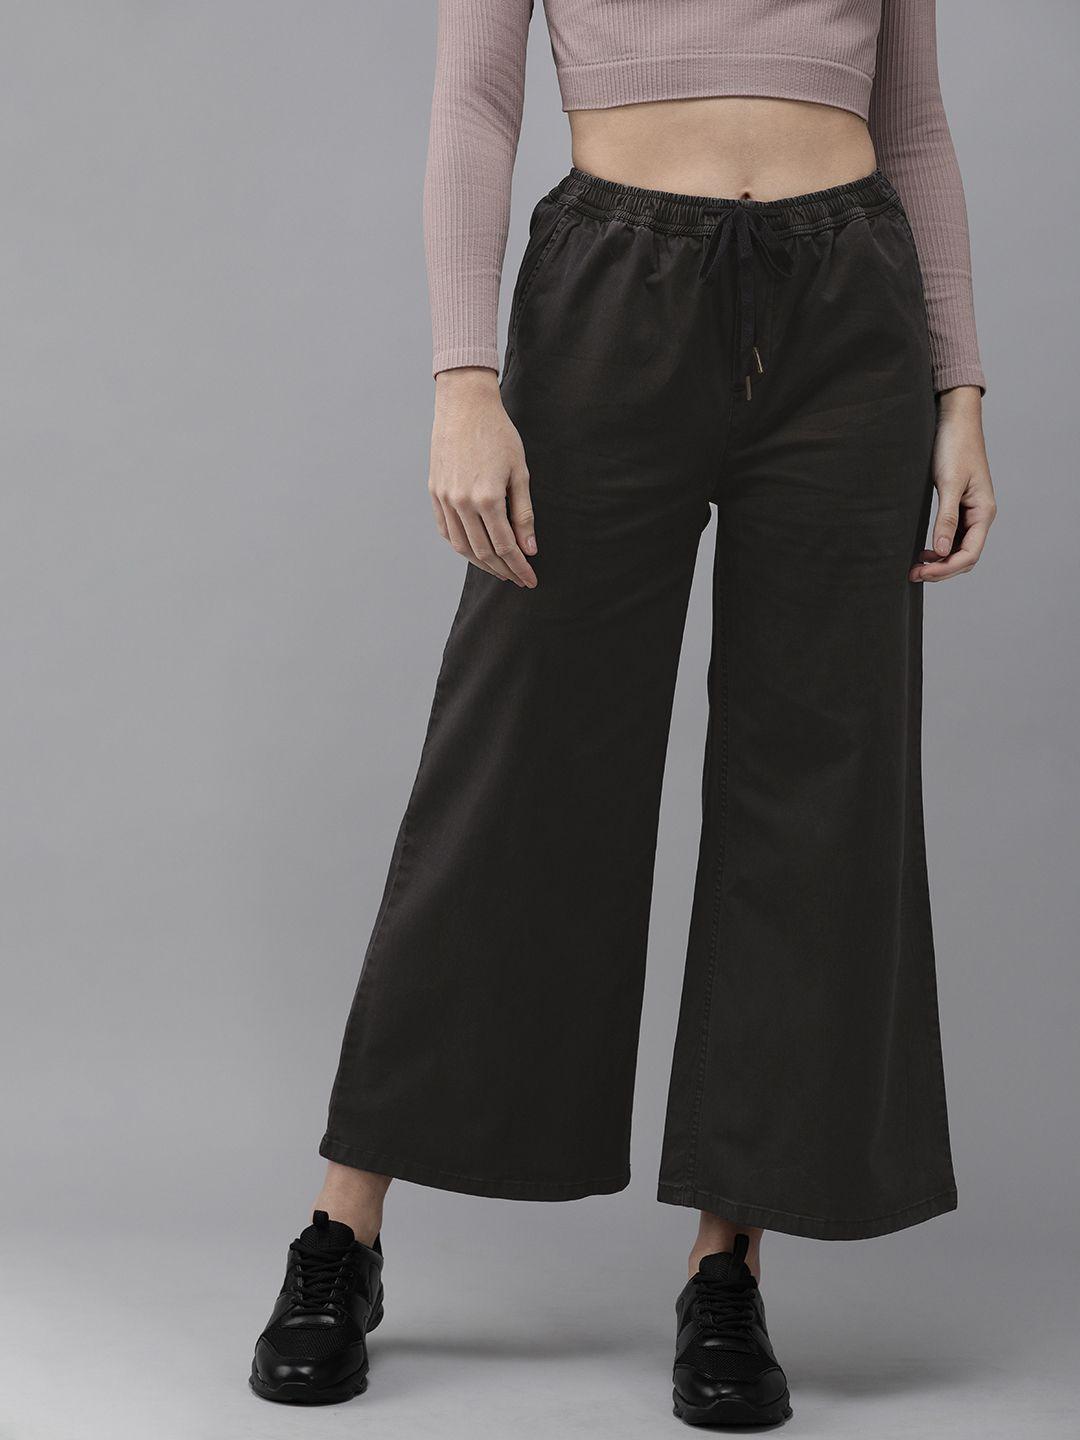 the-roadster-lifestyle-co-women-black-flared-pleated-cropped-chinos